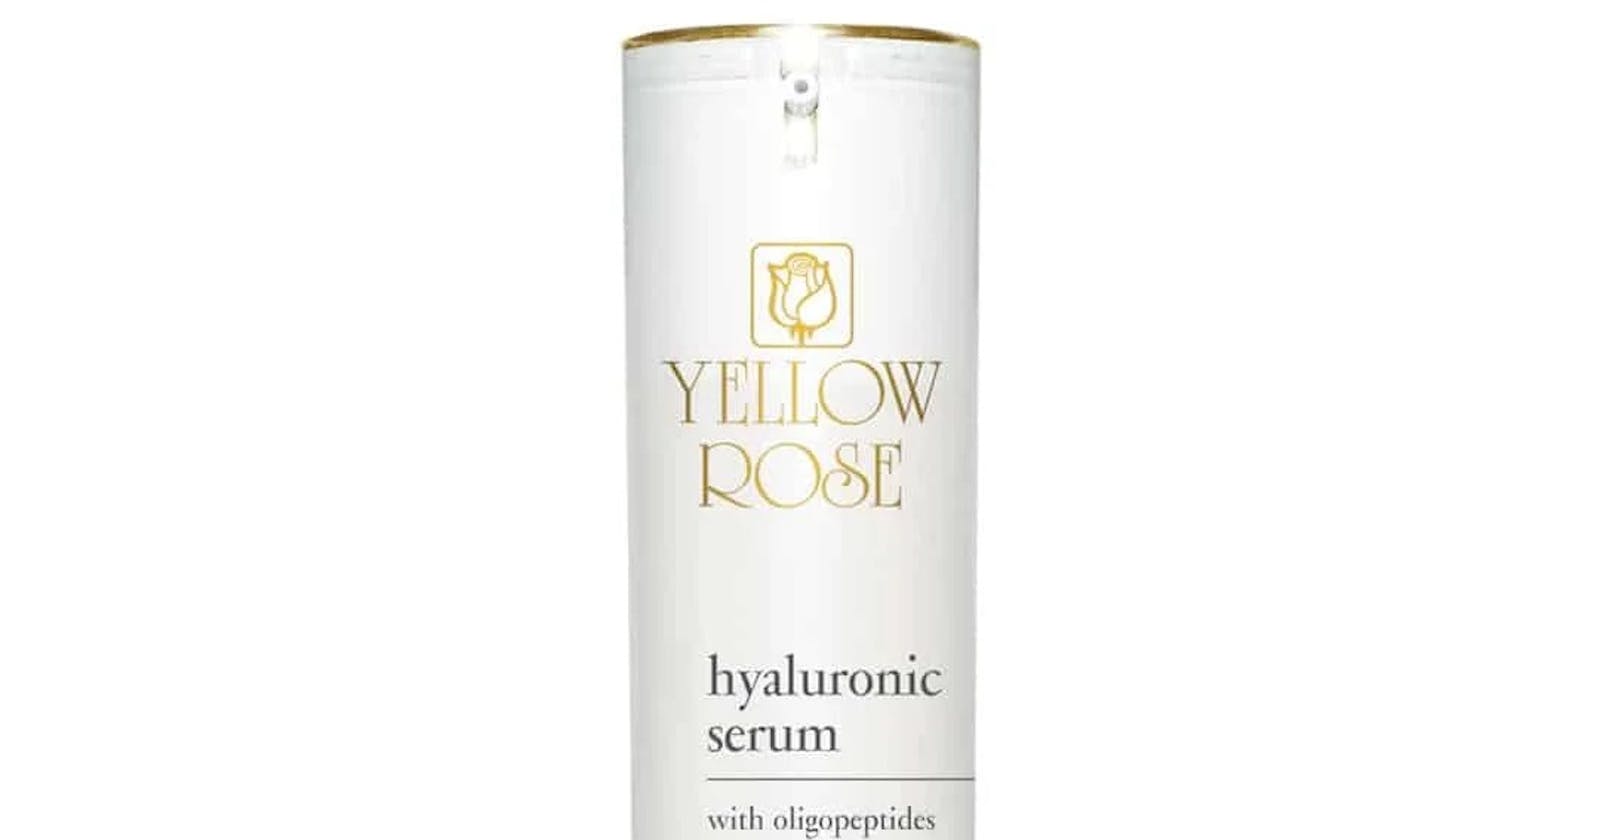 HYALURONIC ACID SERUM: Revealing the Secrets to a Hydrated, Youthful Complexion